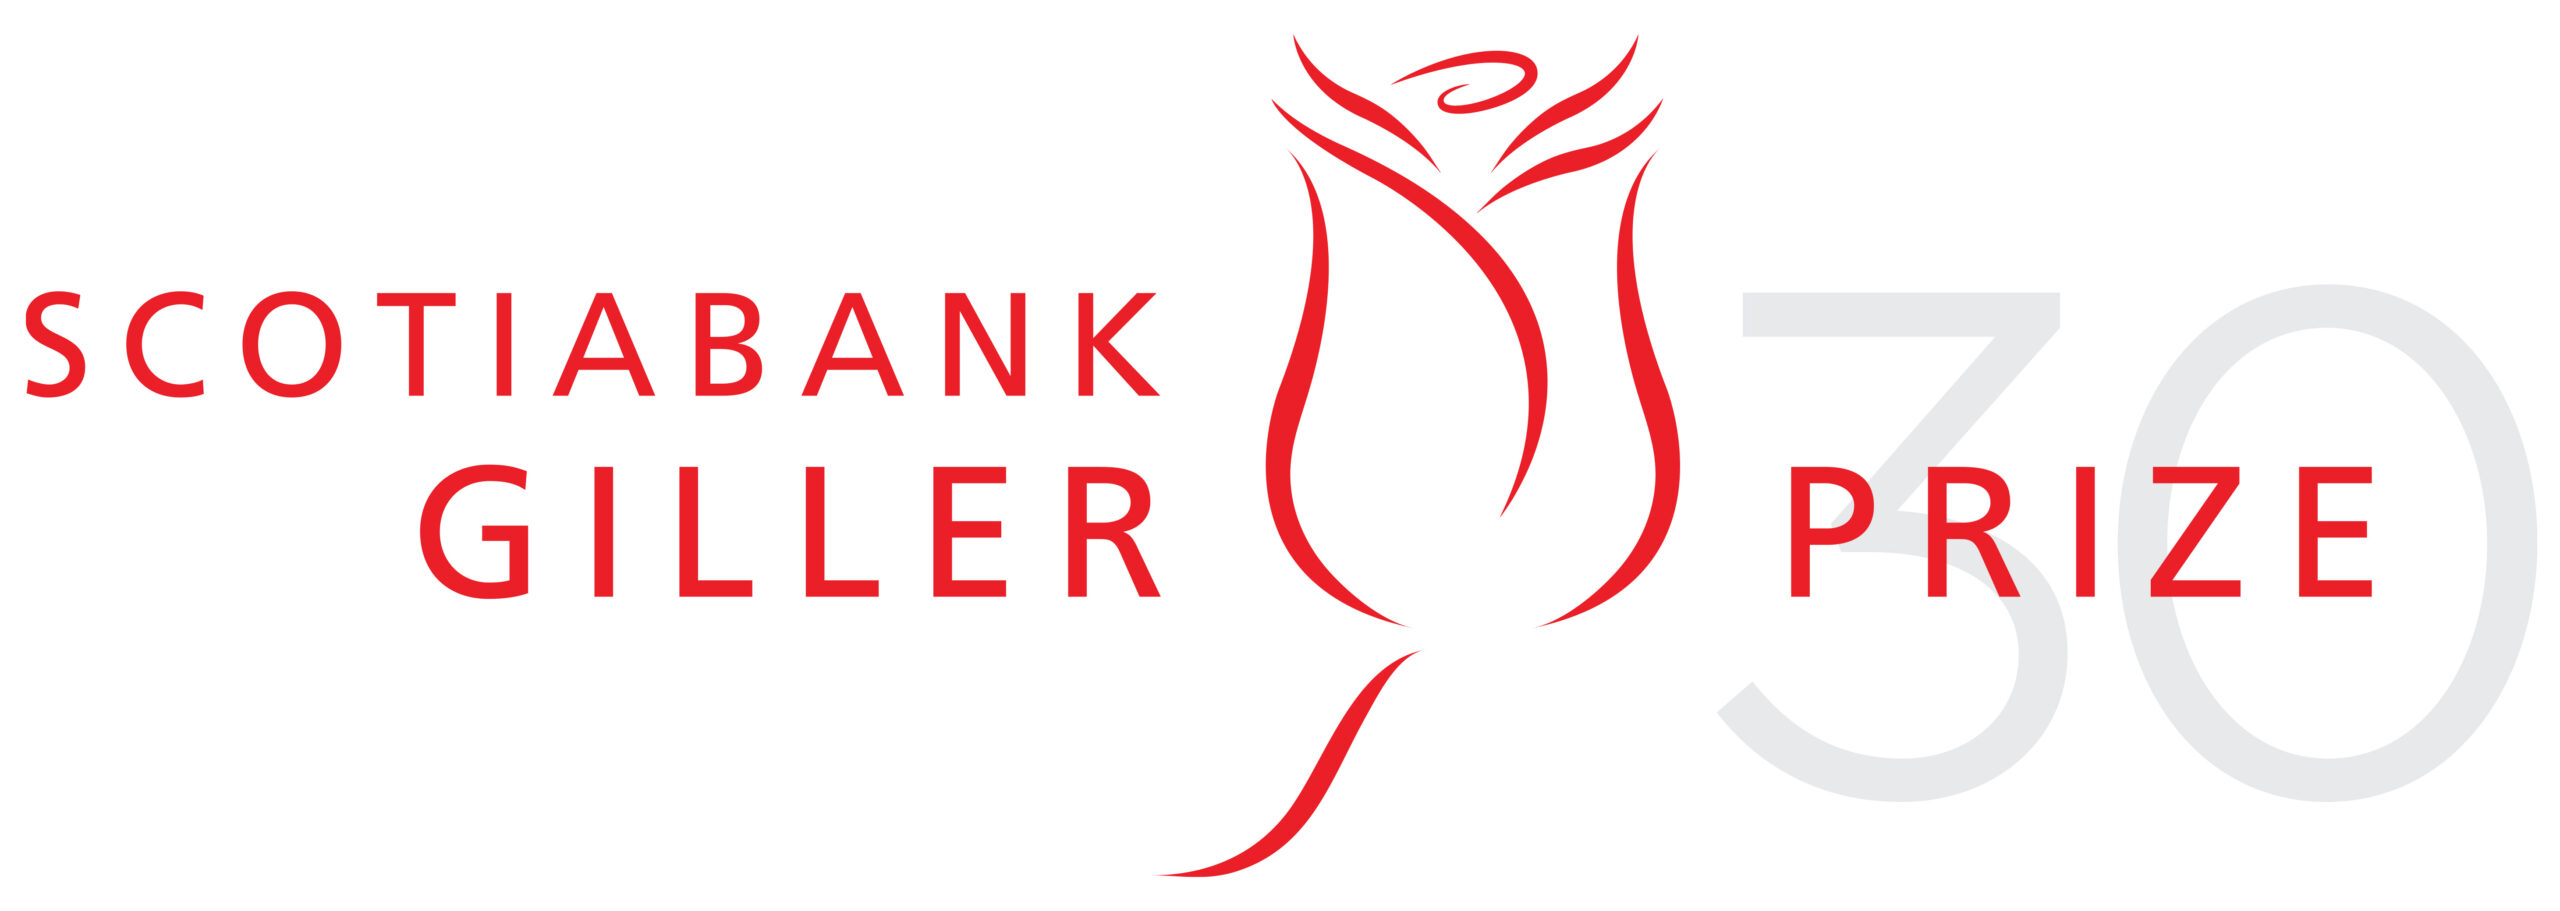 Scotiabank Giller Prize 30th Anniversary logo